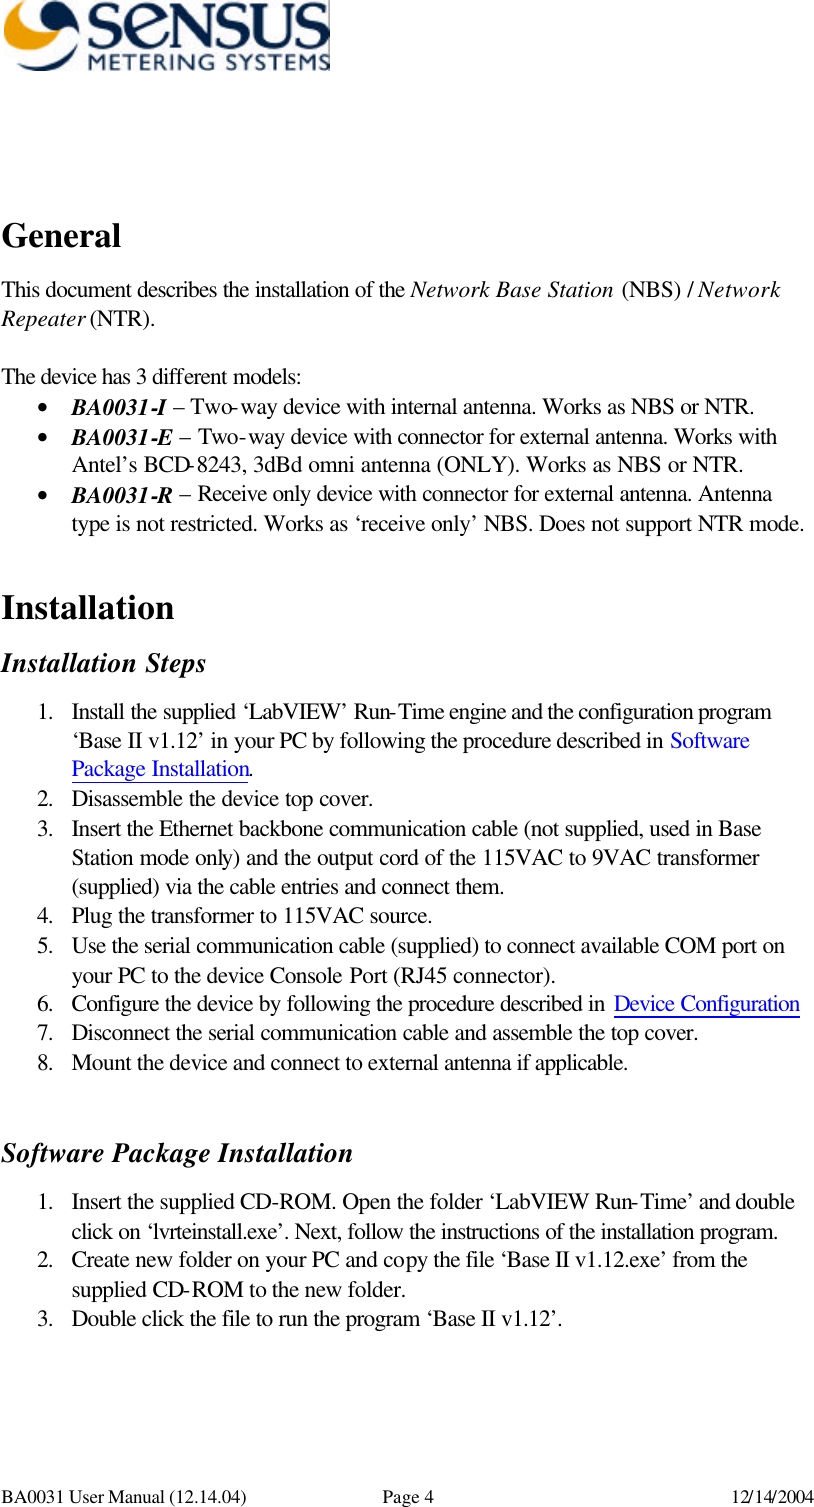      BA0031 User Manual (12.14.04) Page 4 12/14/2004   General This document describes the installation of the Network Base Station (NBS) / Network Repeater (NTR).   The device has 3 different models: • BA0031-I – Two-way device with internal antenna. Works as NBS or NTR. • BA0031-E – Two-way device with connector for external antenna. Works with Antel’s BCD-8243, 3dBd omni antenna (ONLY). Works as NBS or NTR. • BA0031-R – Receive only device with connector for external antenna. Antenna type is not restricted. Works as ‘receive only’ NBS. Does not support NTR mode.   Installation Installation Steps 1. Install the supplied ‘LabVIEW’ Run-Time engine and the configuration program ‘Base II v1.12’ in your PC by following the procedure described in Software Package Installation. 2. Disassemble the device top cover.  3. Insert the Ethernet backbone communication cable (not supplied, used in Base Station mode only) and the output cord of the 115VAC to 9VAC transformer (supplied) via the cable entries and connect them. 4. Plug the transformer to 115VAC source. 5. Use the serial communication cable (supplied) to connect available COM port on your PC to the device Console Port (RJ45 connector). 6. Configure the device by following the procedure described in Device Configuration  7. Disconnect the serial communication cable and assemble the top cover. 8. Mount the device and connect to external antenna if applicable.   Software Package Installation 1. Insert the supplied CD-ROM. Open the folder ‘LabVIEW Run-Time’ and double click on ‘lvrteinstall.exe’. Next, follow the instructions of the installation program. 2. Create new folder on your PC and copy the file ‘Base II v1.12.exe’ from the supplied CD-ROM to the new folder. 3. Double click the file to run the program ‘Base II v1.12’.  